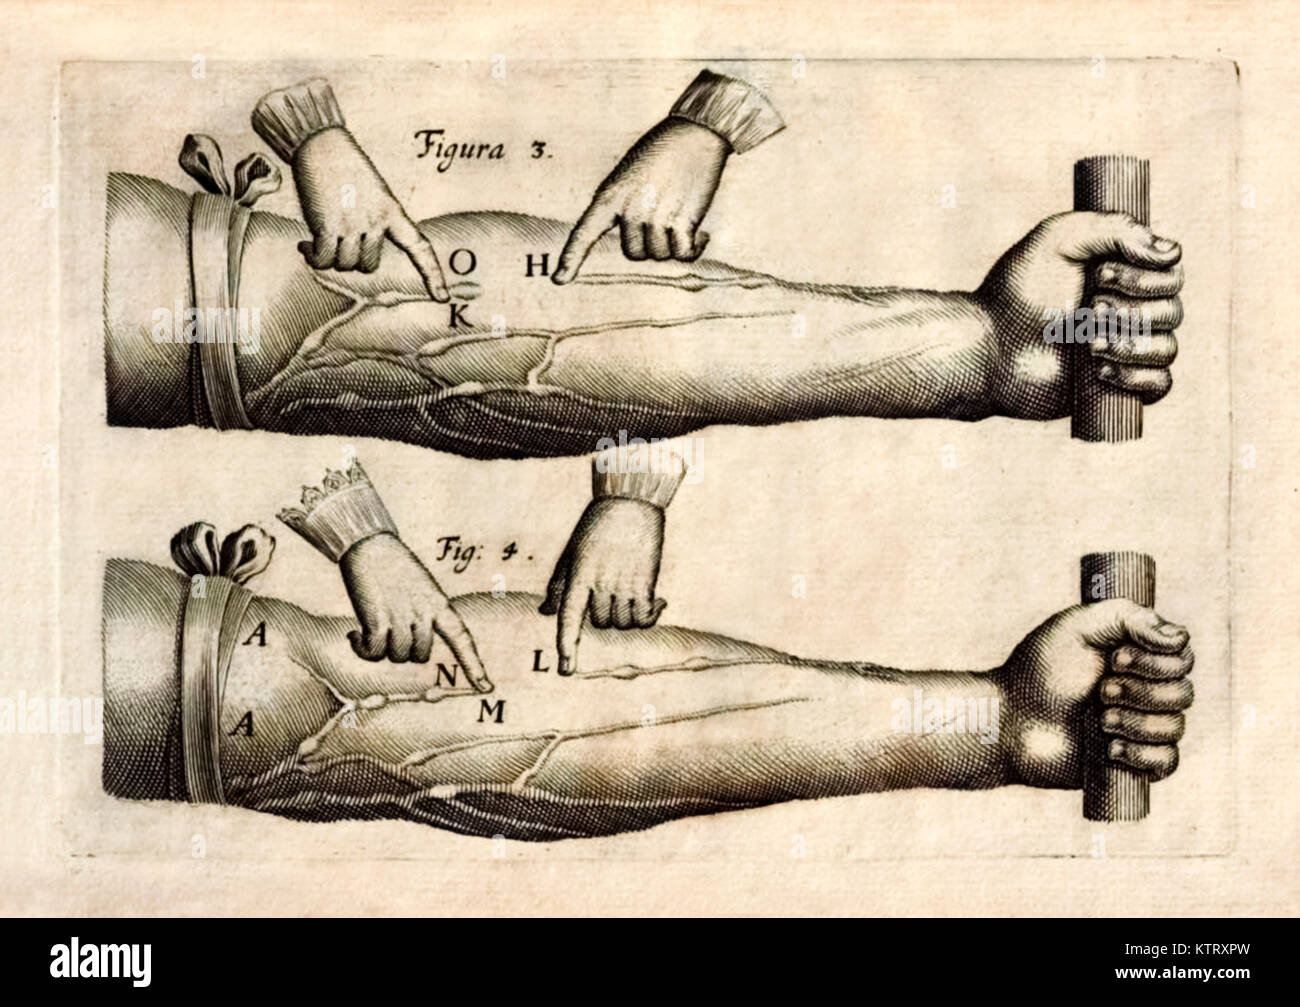 Plate 2 from ‘De Motu Cordis set Sanguinis in Animalibus’ (The Motion of the Heart and Blood in Living Beings) by William Harvey (1578-1657) showing the network of veins in the forearm containing one way valves showing blood flowing towards the heart. See more information below. Stock Photo